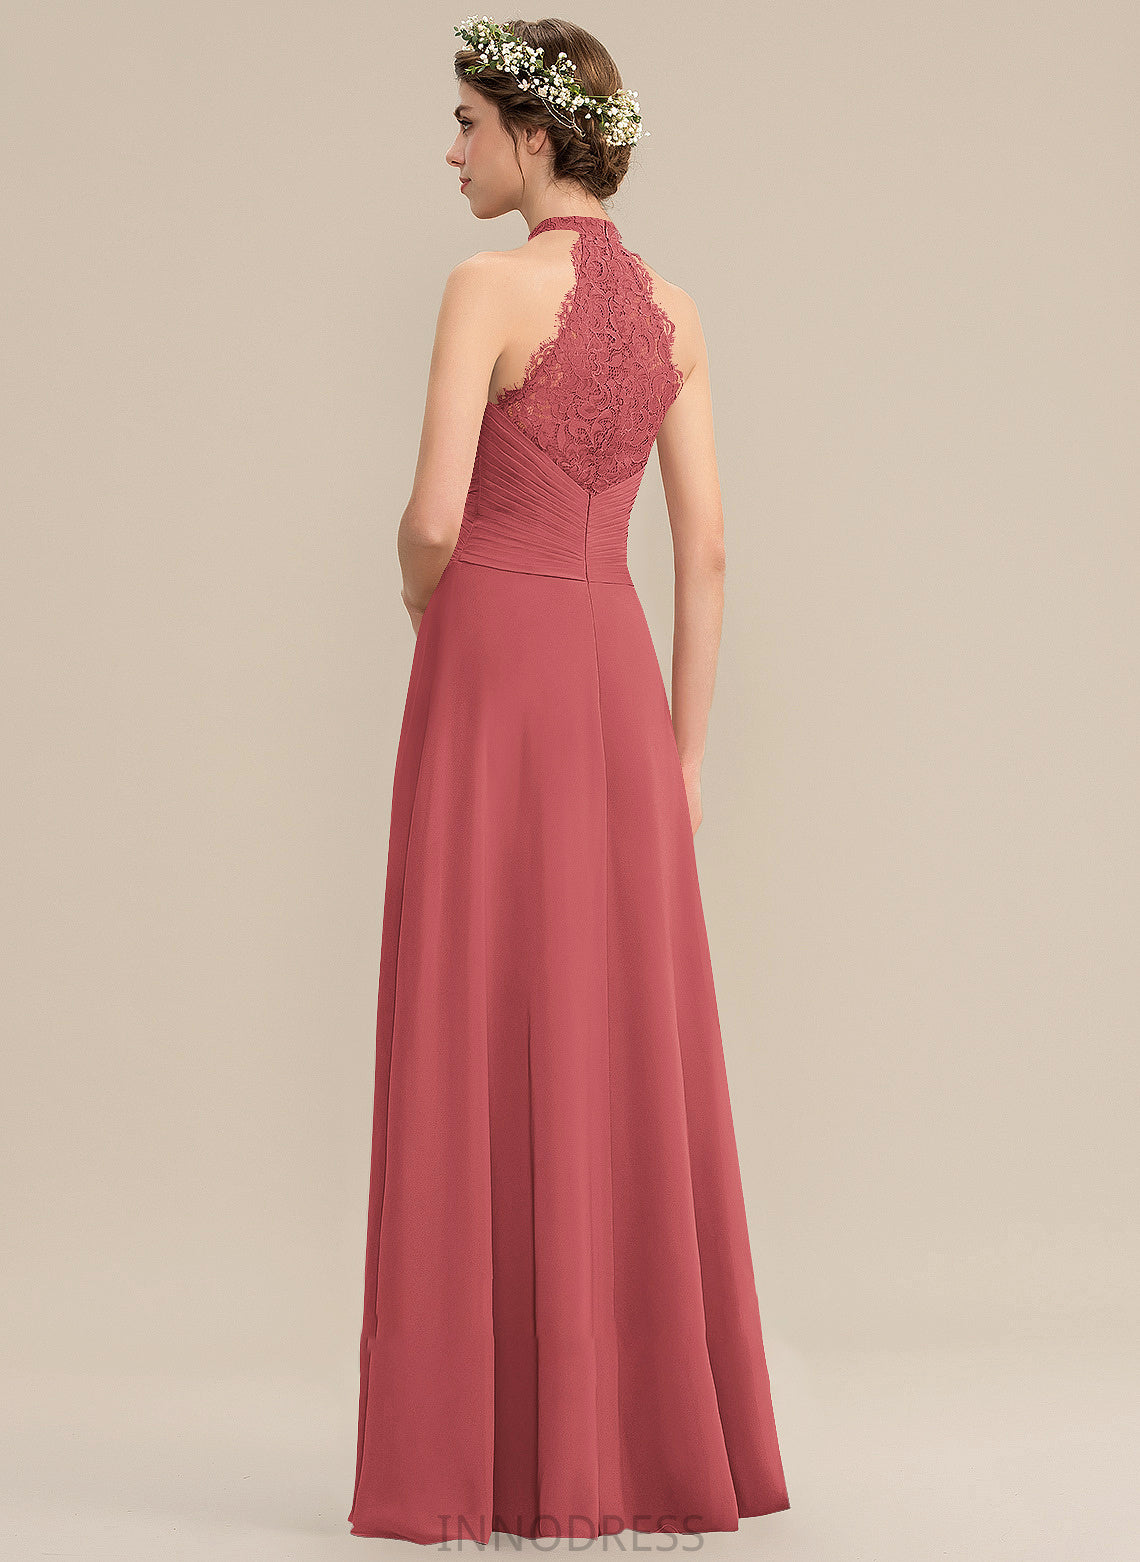 Prom Dresses A-Line Neck Split With Jane Lace High Ruffle Front Chiffon Floor-Length